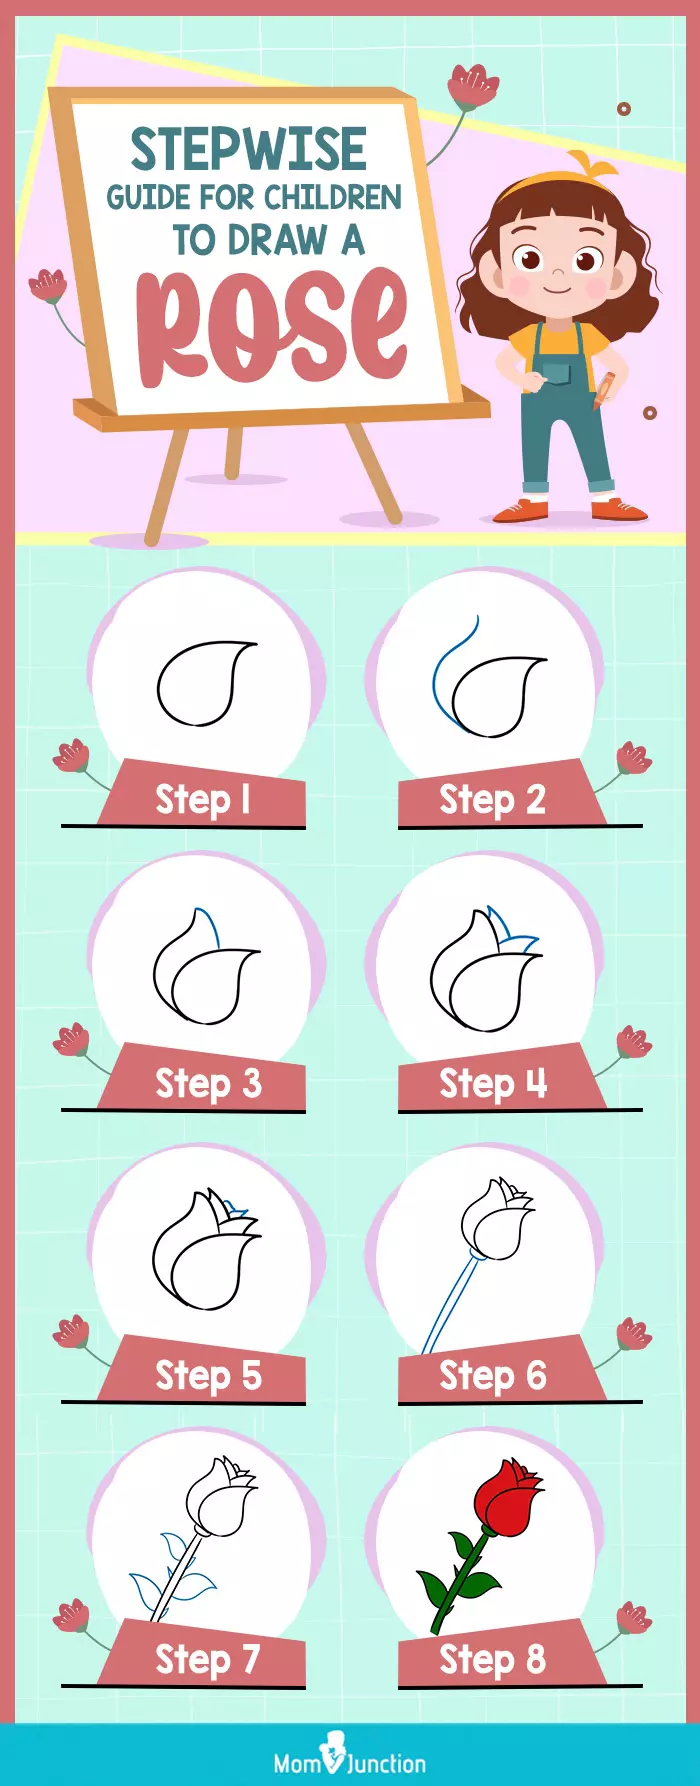 stepwise guide for children to draw a rose (infographic)